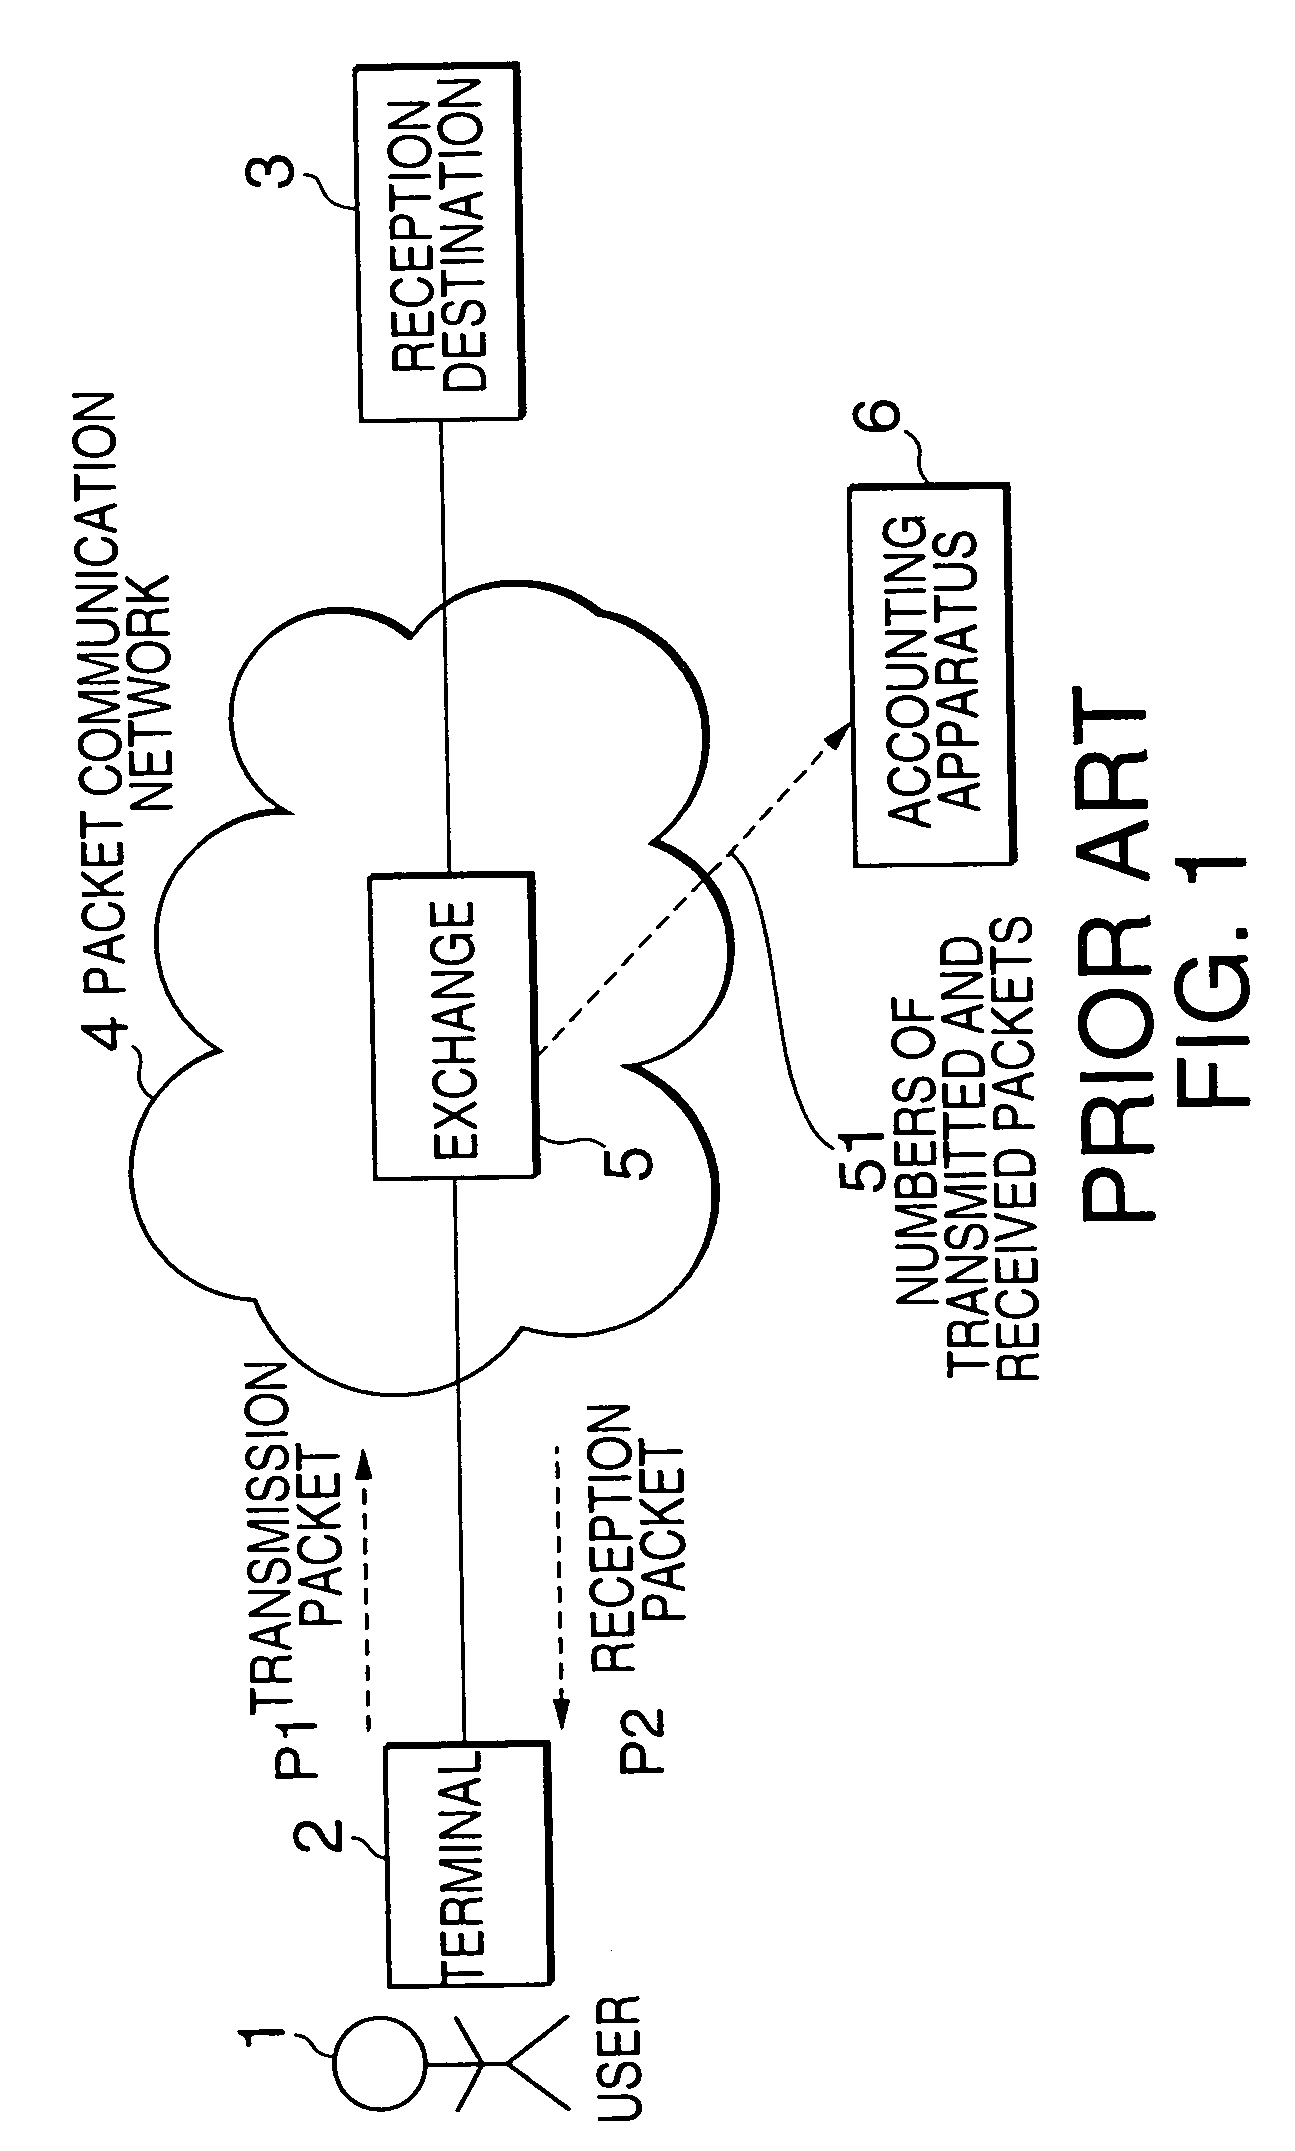 Accounting method and system in a packet communication network